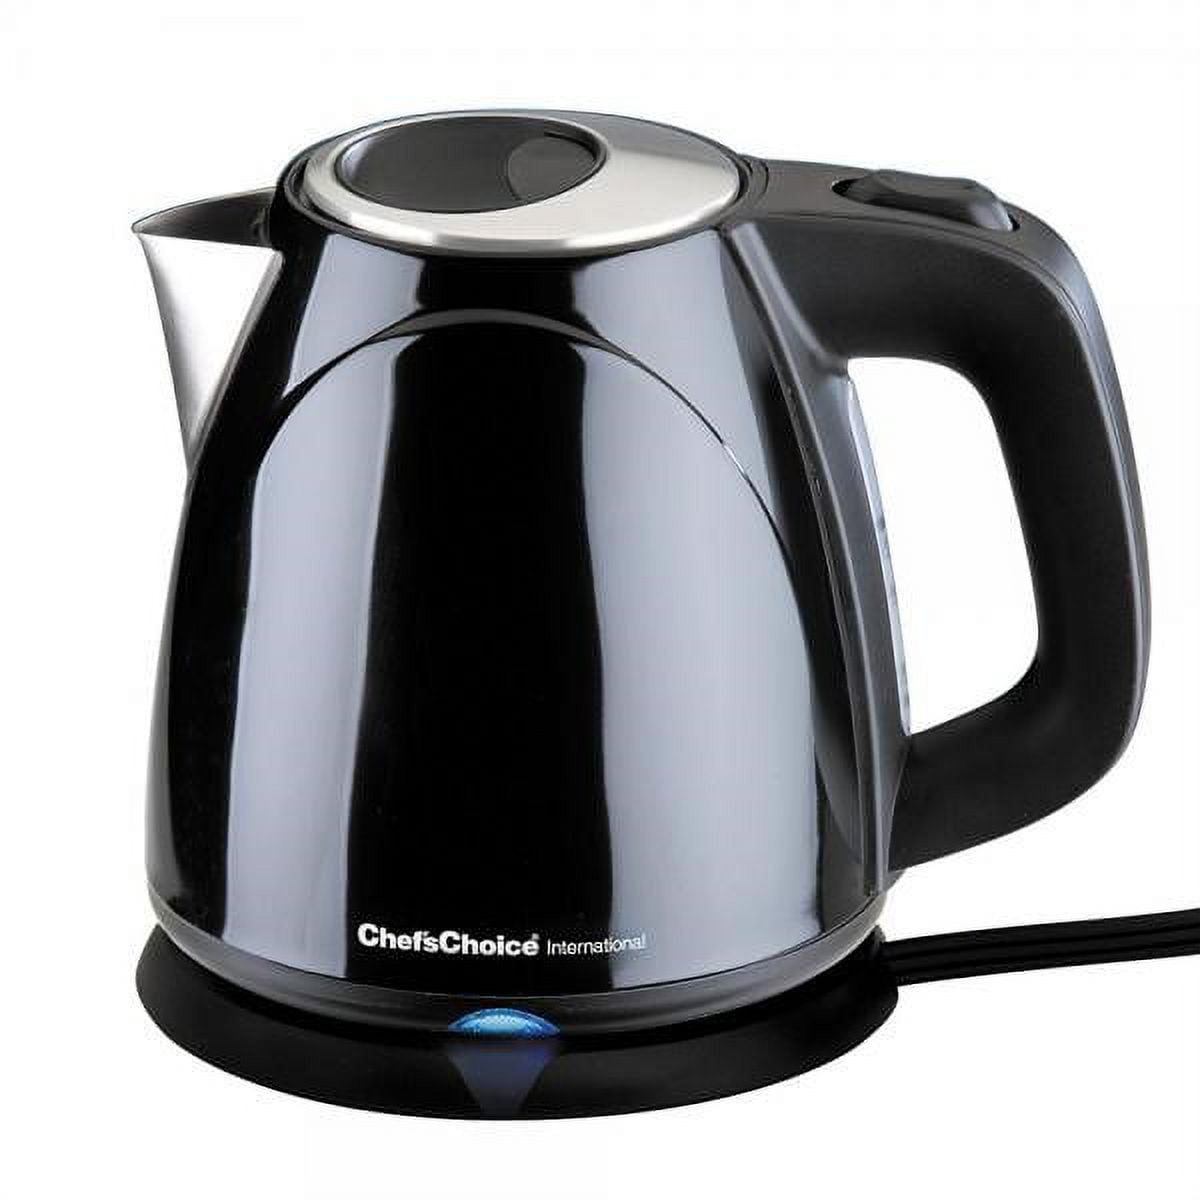 Winado 10.4-Cup Glass and Stainless Steel Electric Kettle with Temperature  Control 056246322246 - The Home Depot